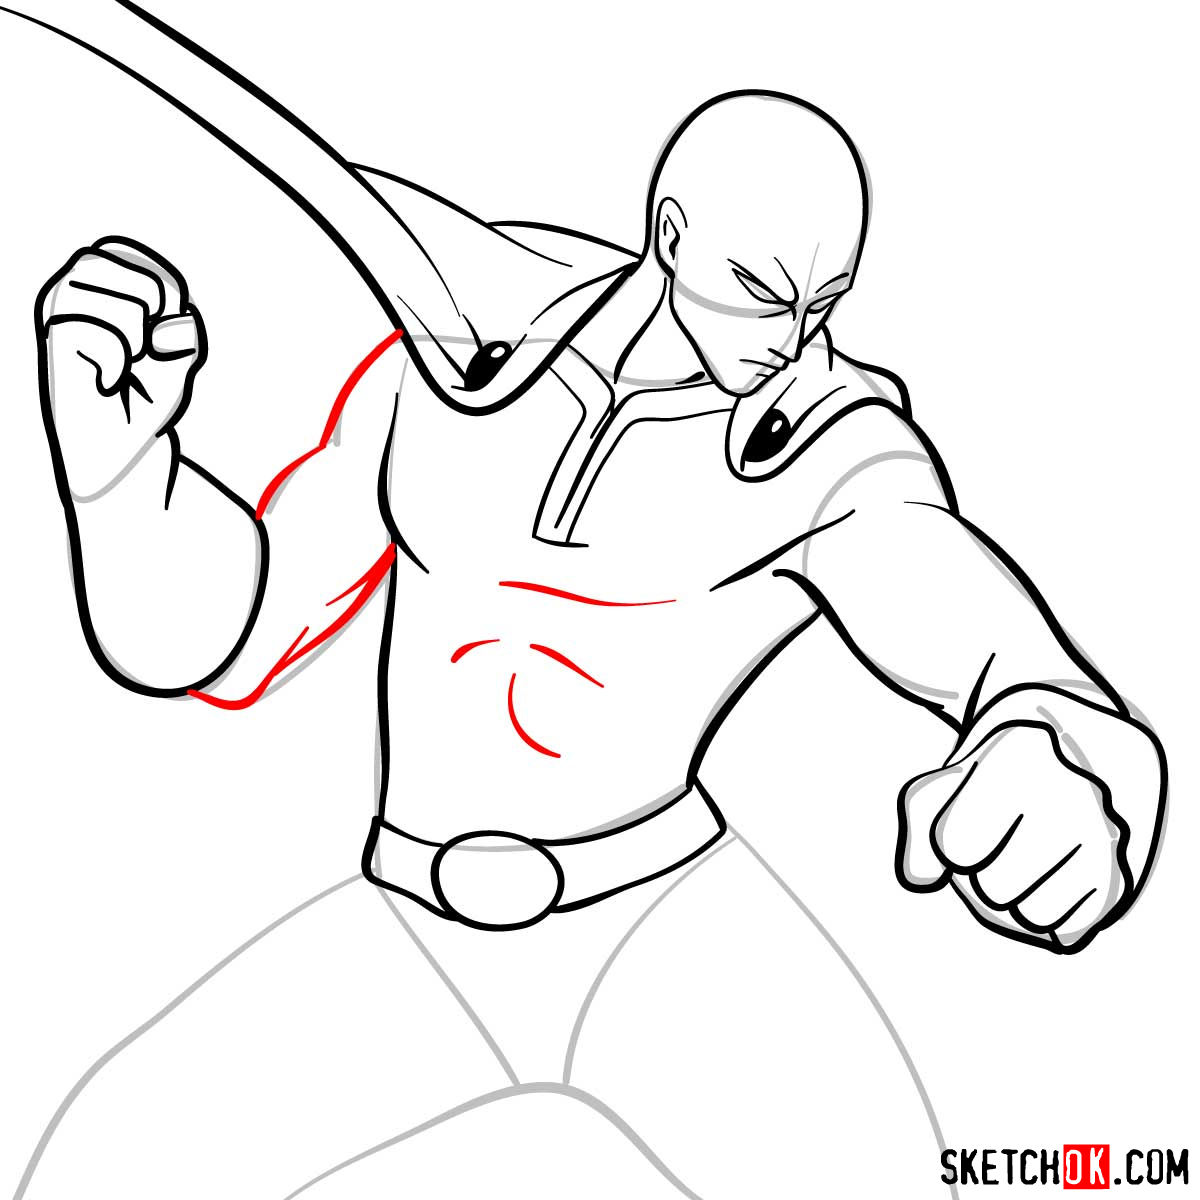 How to draw fighting Saitama in 12 steps - step 10